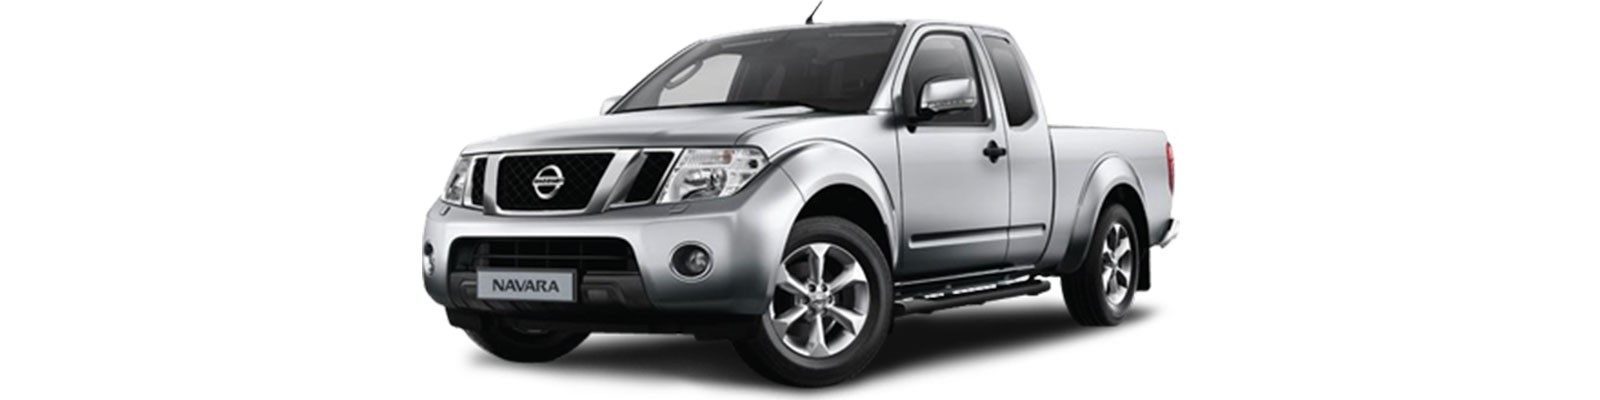 Accessories For Nissan D40 Navara King Cab From 2010 To 2015